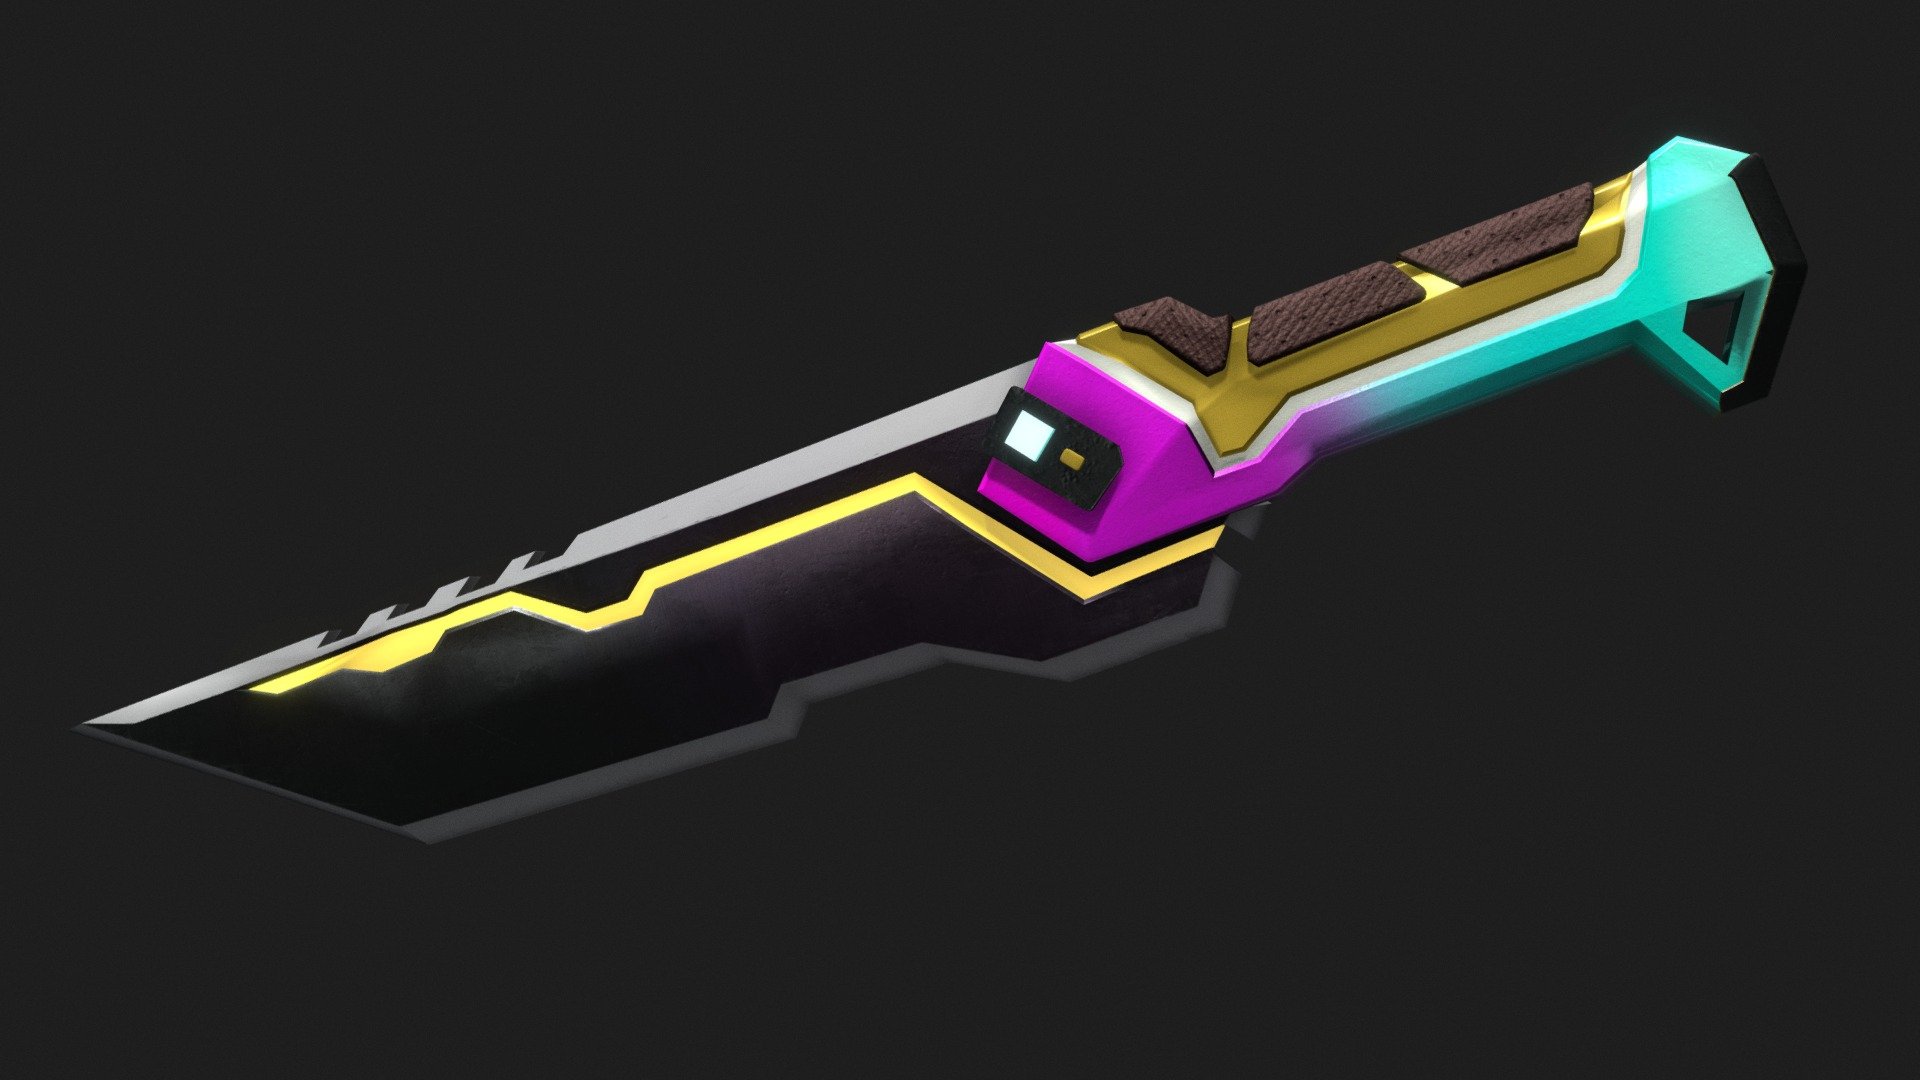 3D model of the Valorant knife skin &lsquo;glitchpop'.

modeled in MAYA 
textures on SUBSTANCE PAINTER

If you're interested in the model contact me - VALORANT glitchpop knife - Buy Royalty Free 3D model by Ana Moya (@anamoya) 3d model